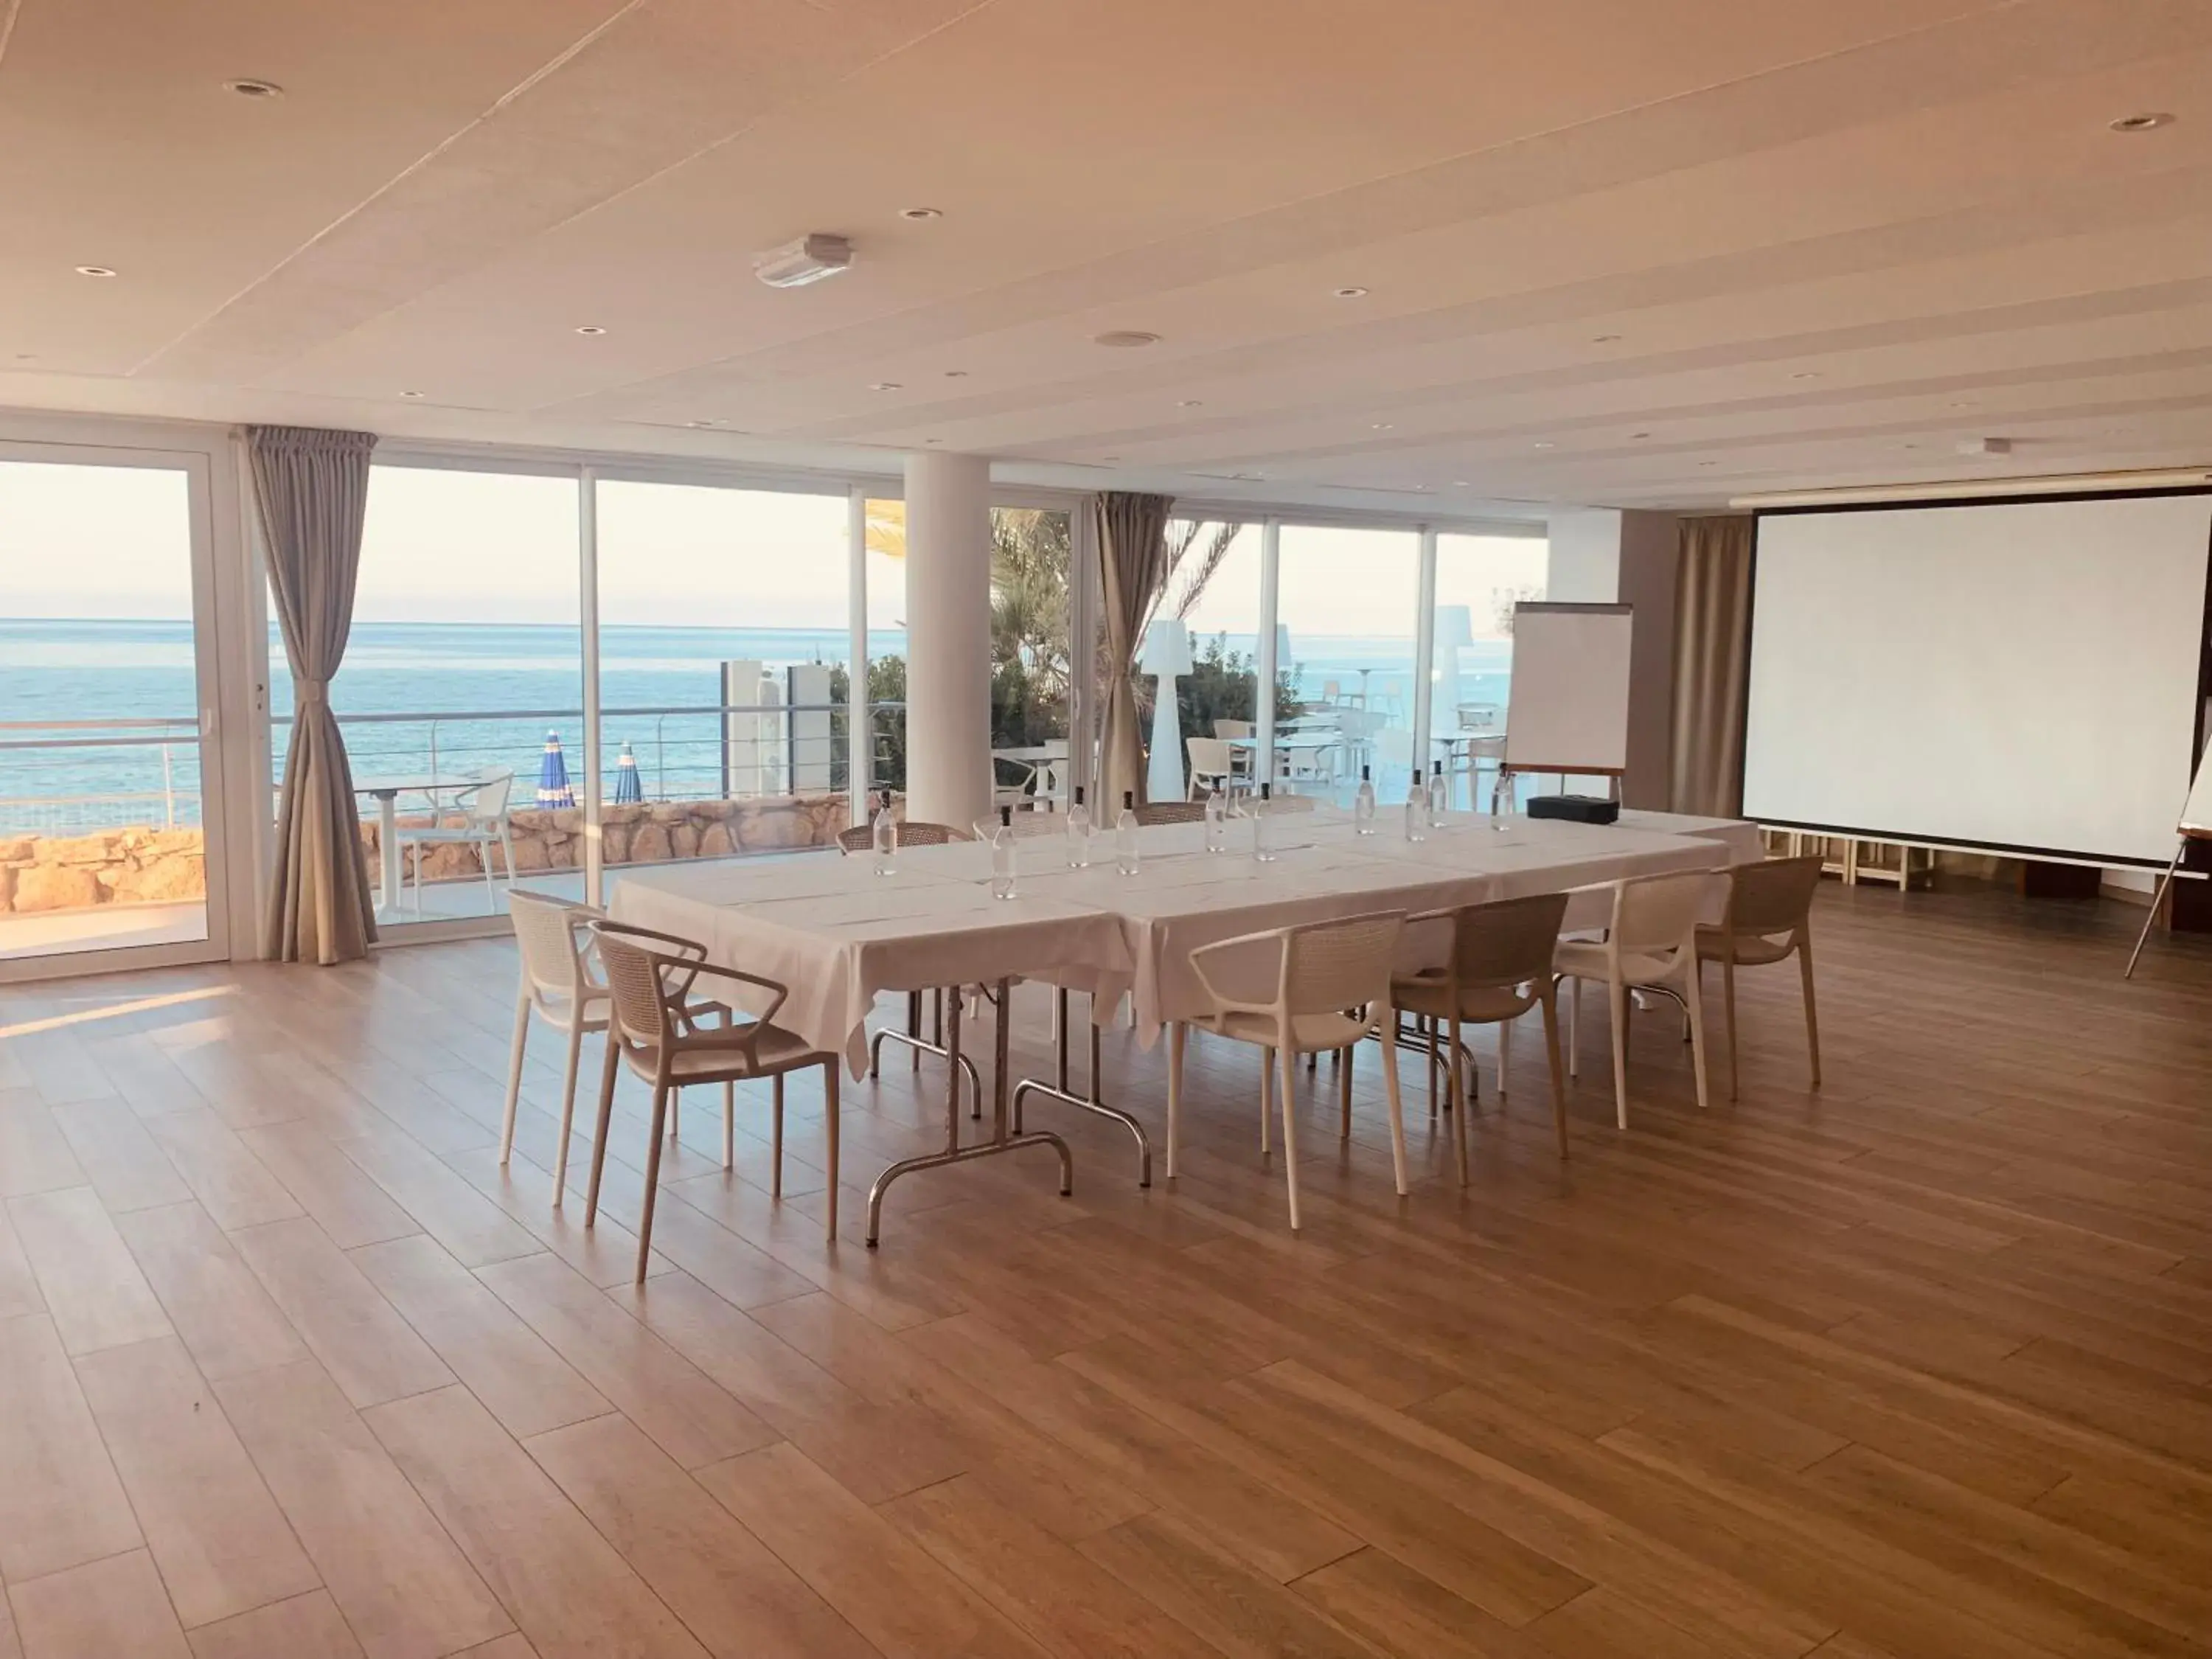 Meeting/conference room in Cala di Sole